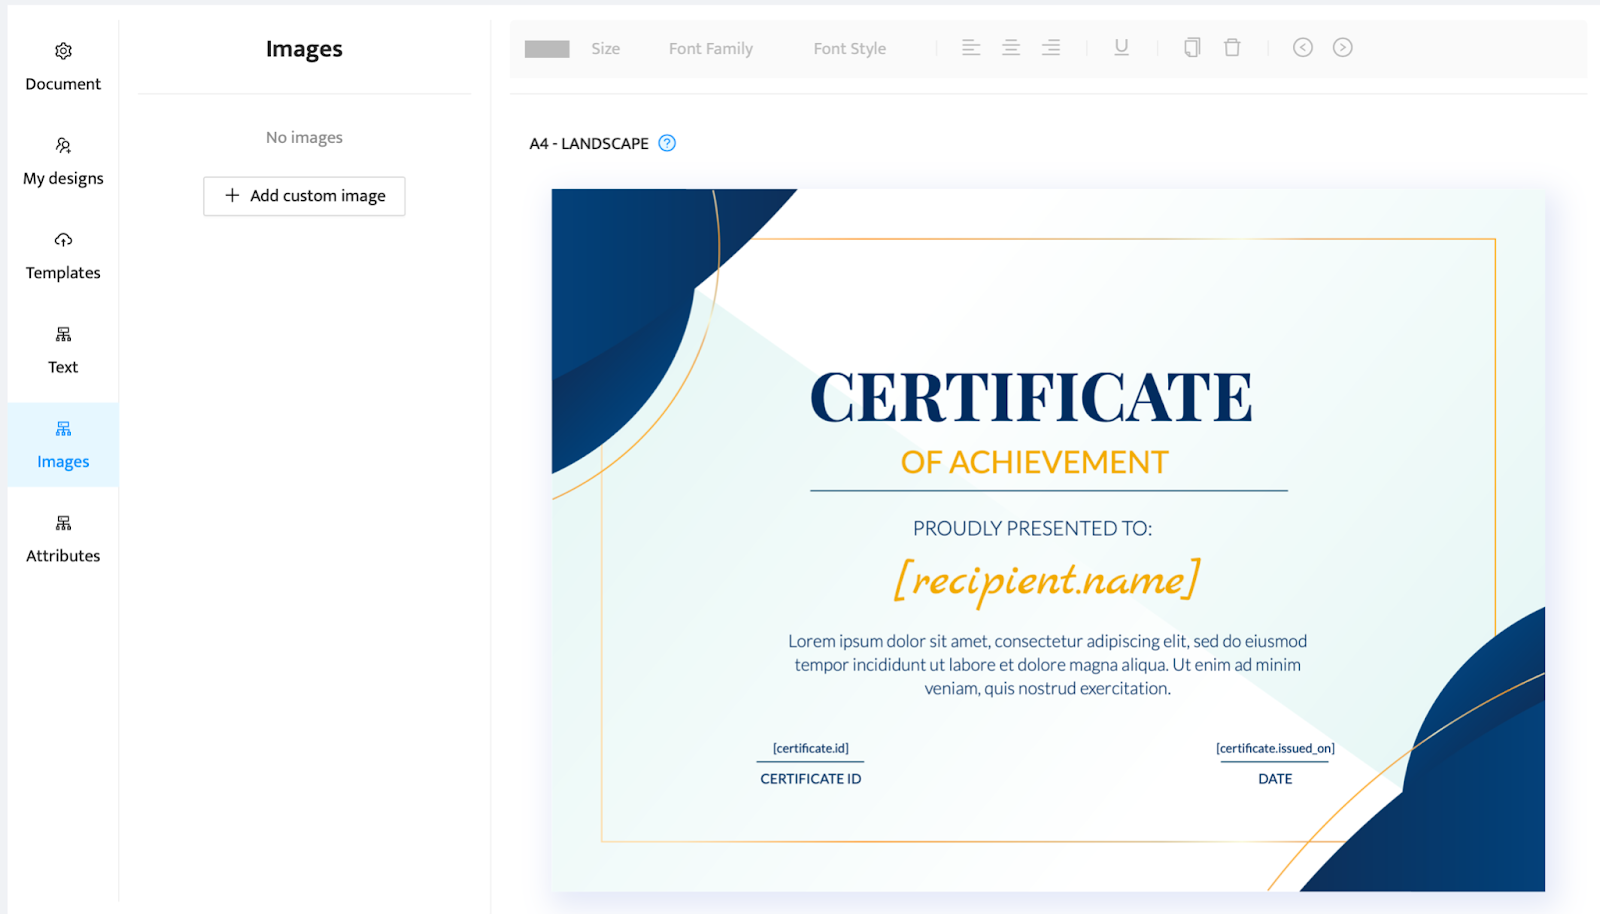 Certificate with custom images